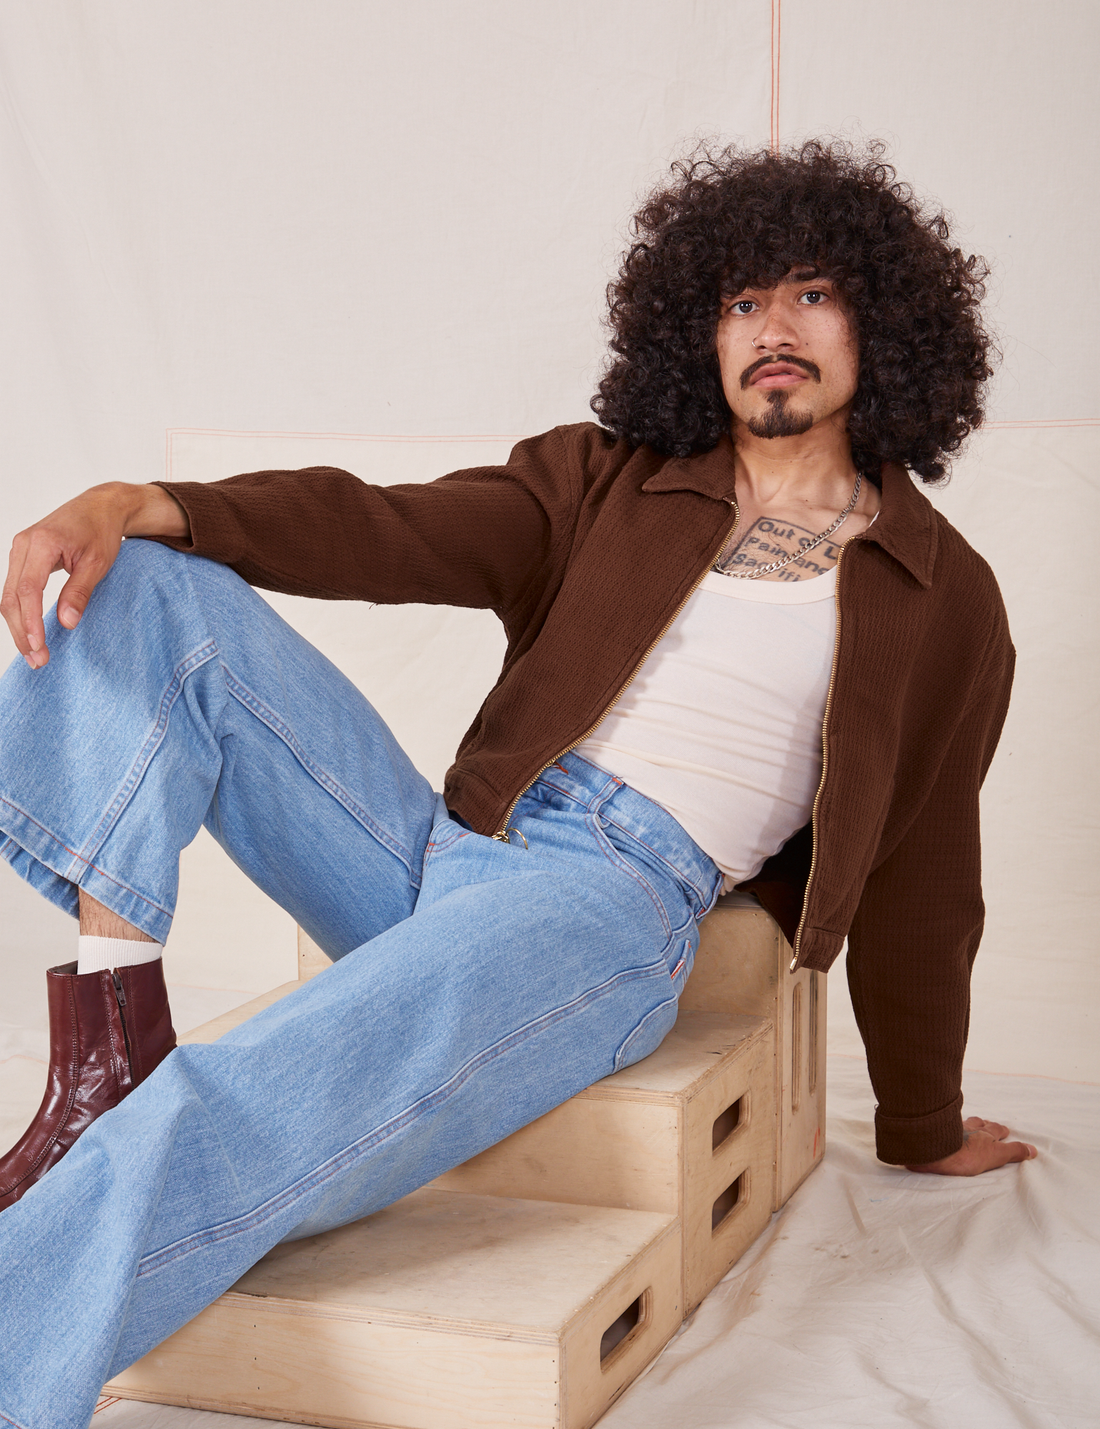 Jesse is 5'8" and wearing XS Ricky Jacket in Fudgesicle Brown paired with a vintage off-white Tank Top and Big Bud Press jeans